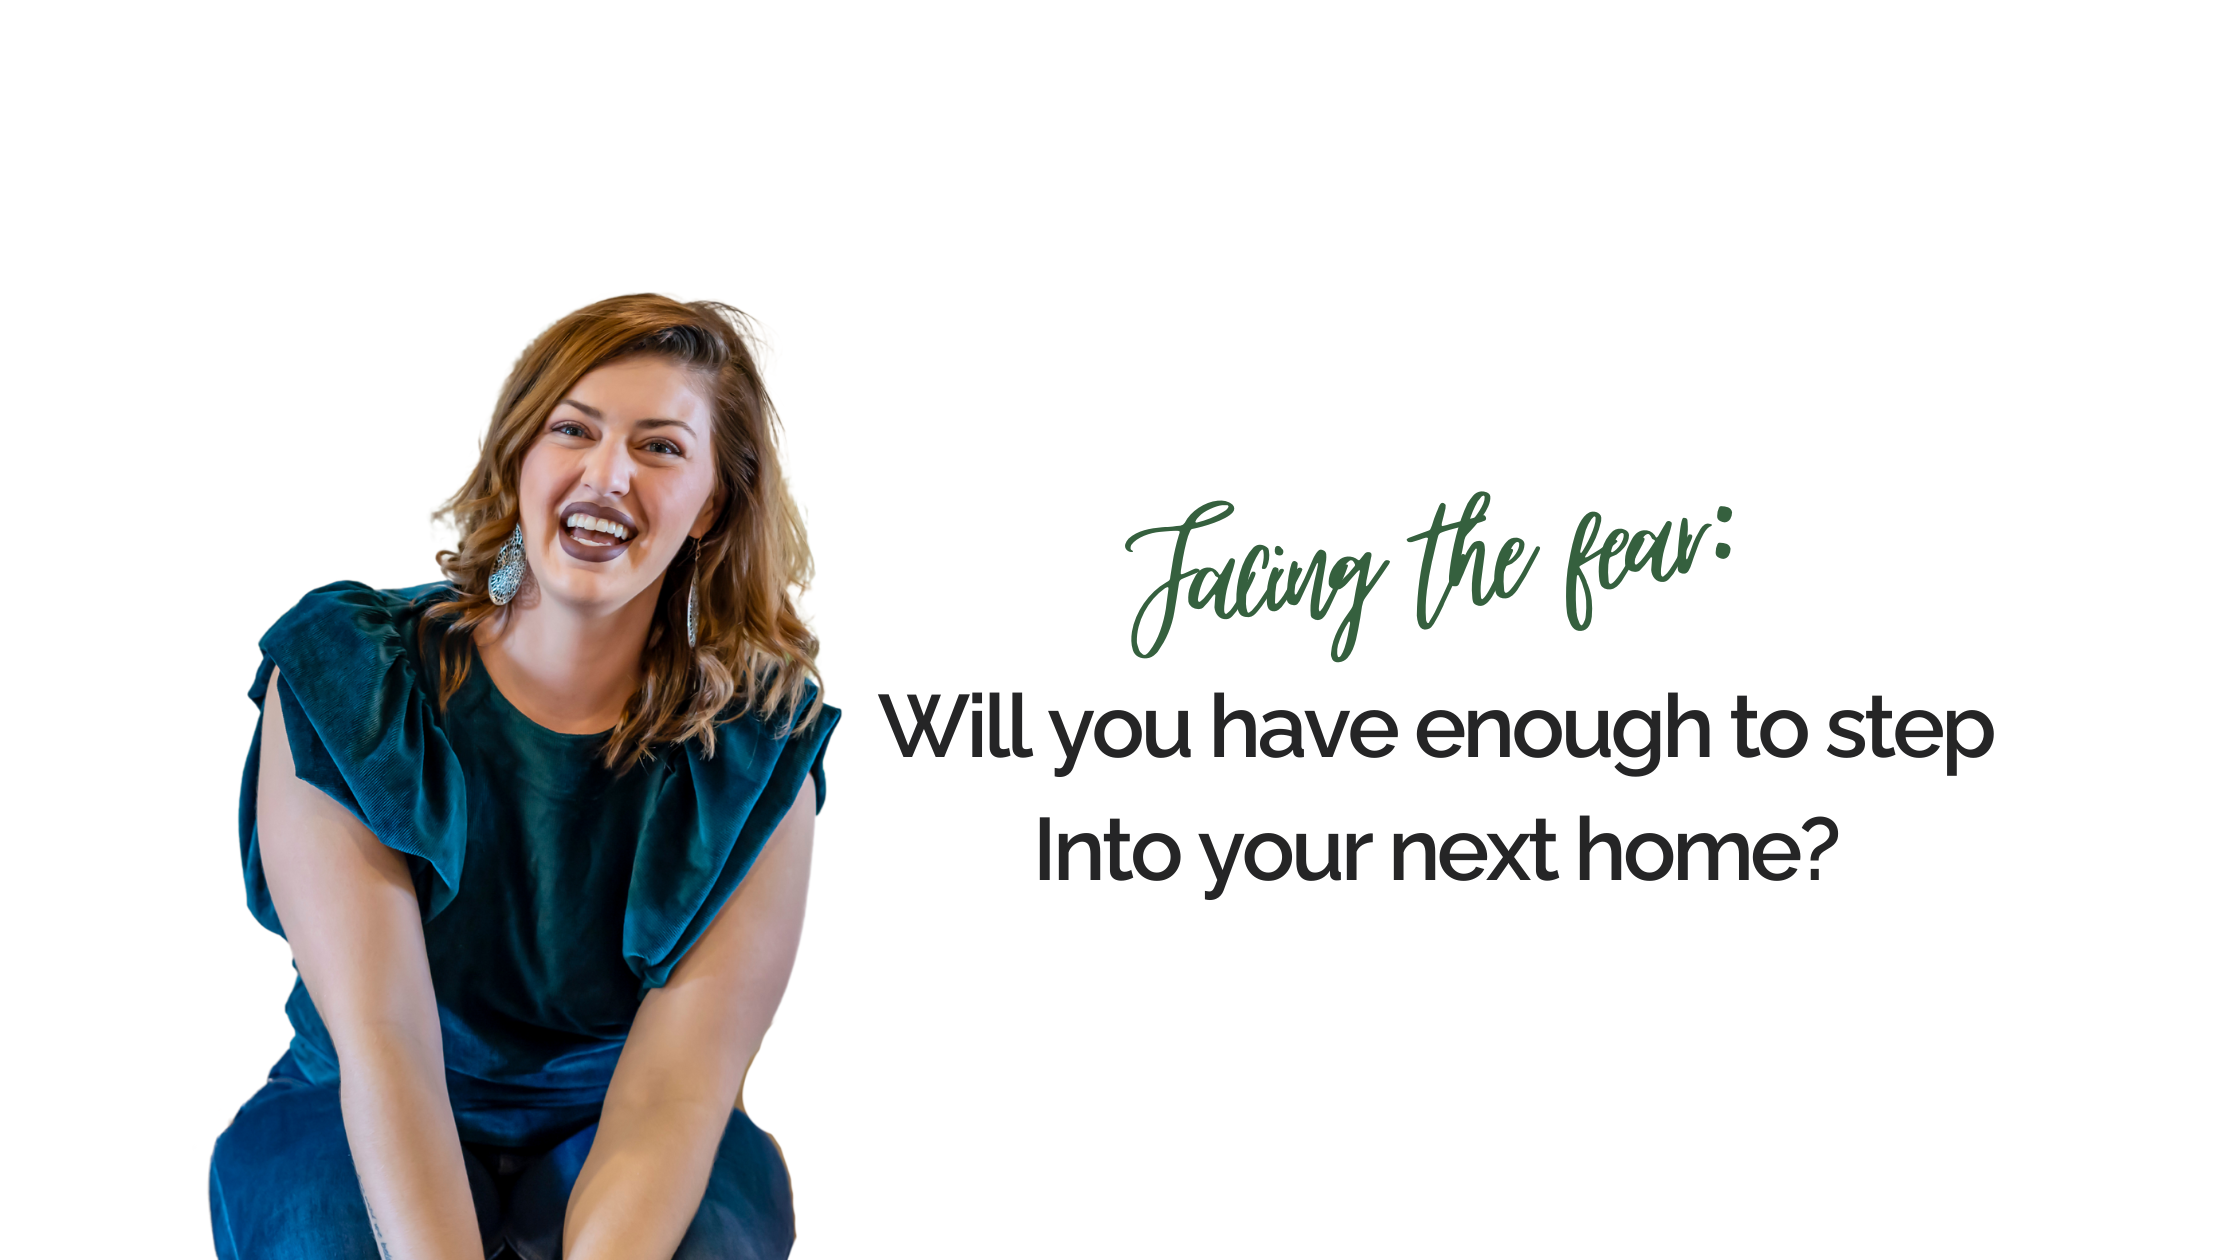 Facing the fear: Will you have enough to step into your next home?